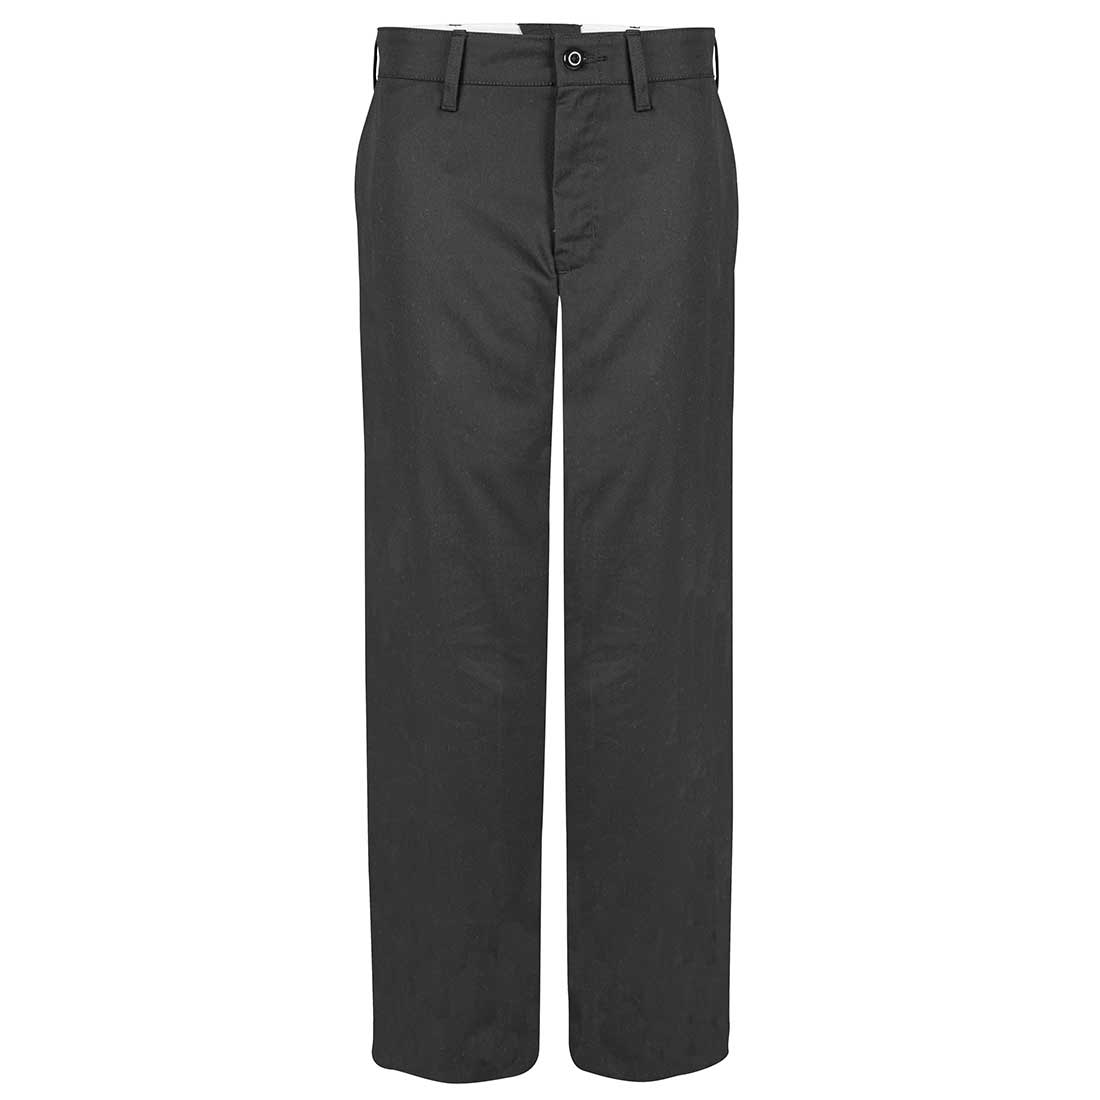 American Dawn | Black 44 Inch Work Pant With 4 Pockets And Brass Ratcheting Zipper And Buttons